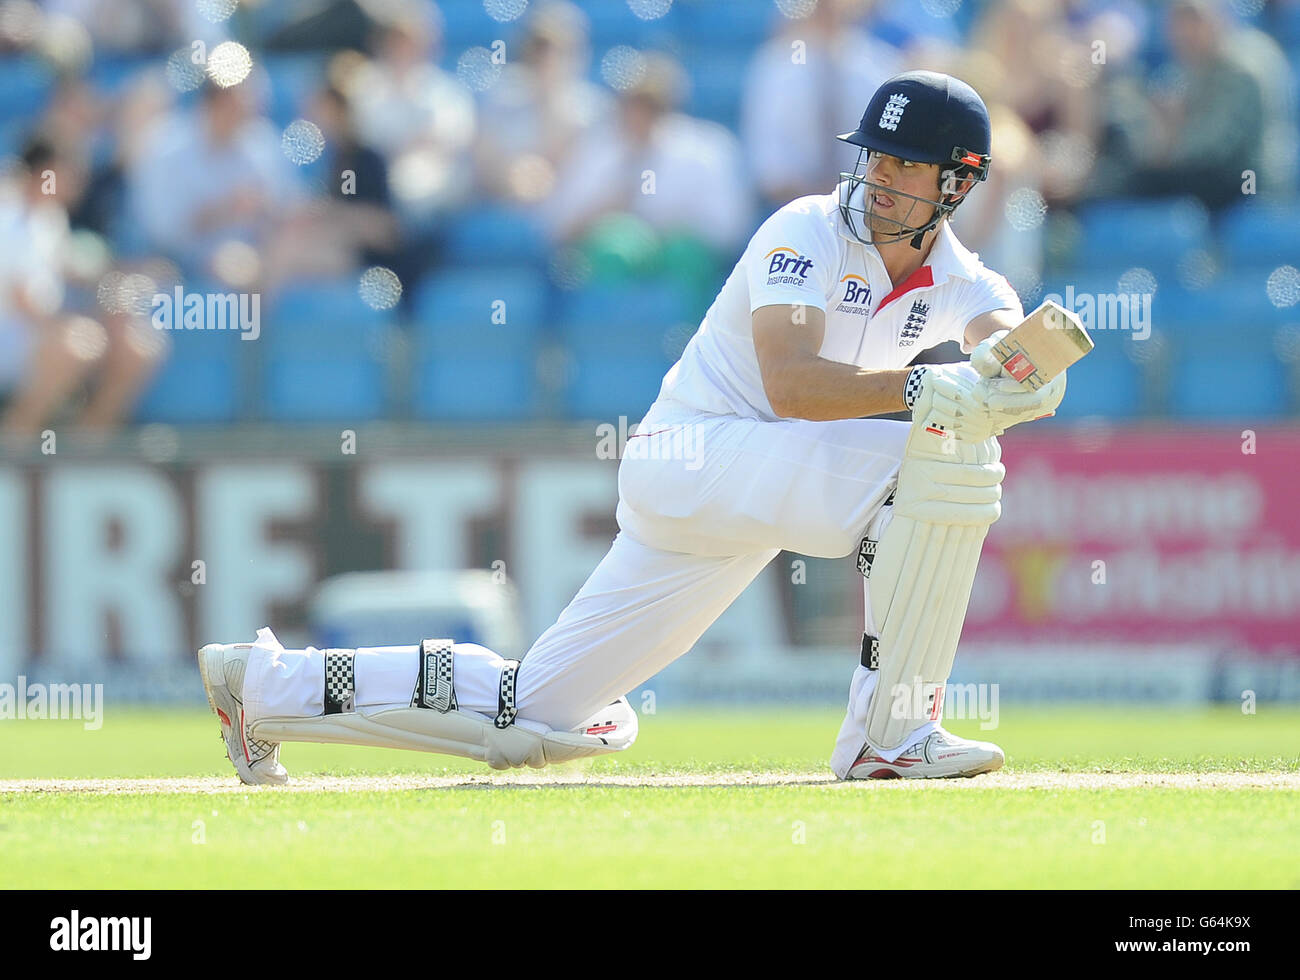 England's Alistair cooke during the Second Investec Test match at Headingley, Leeds. Stock Photo